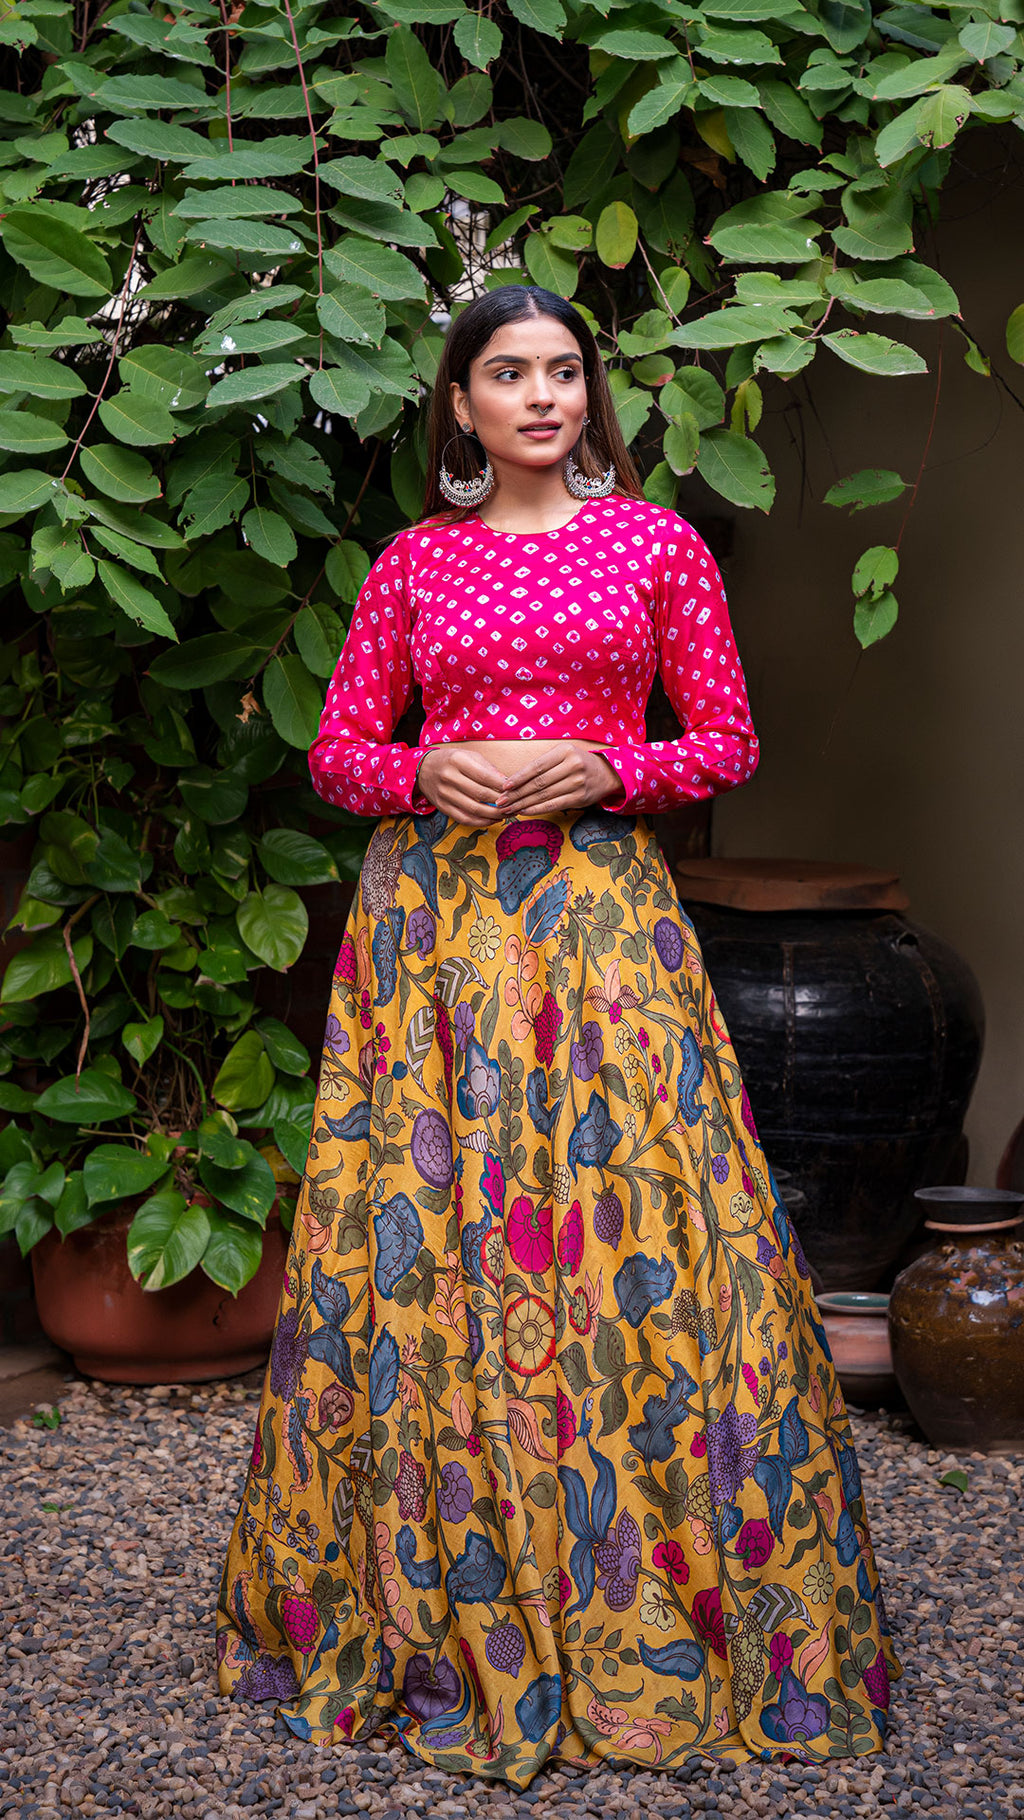 5 Edgy blouse designs with lehenga skirts!! – South India Fashion | Latest lehenga  blouse designs, Long blouse designs, Long skirt outfits